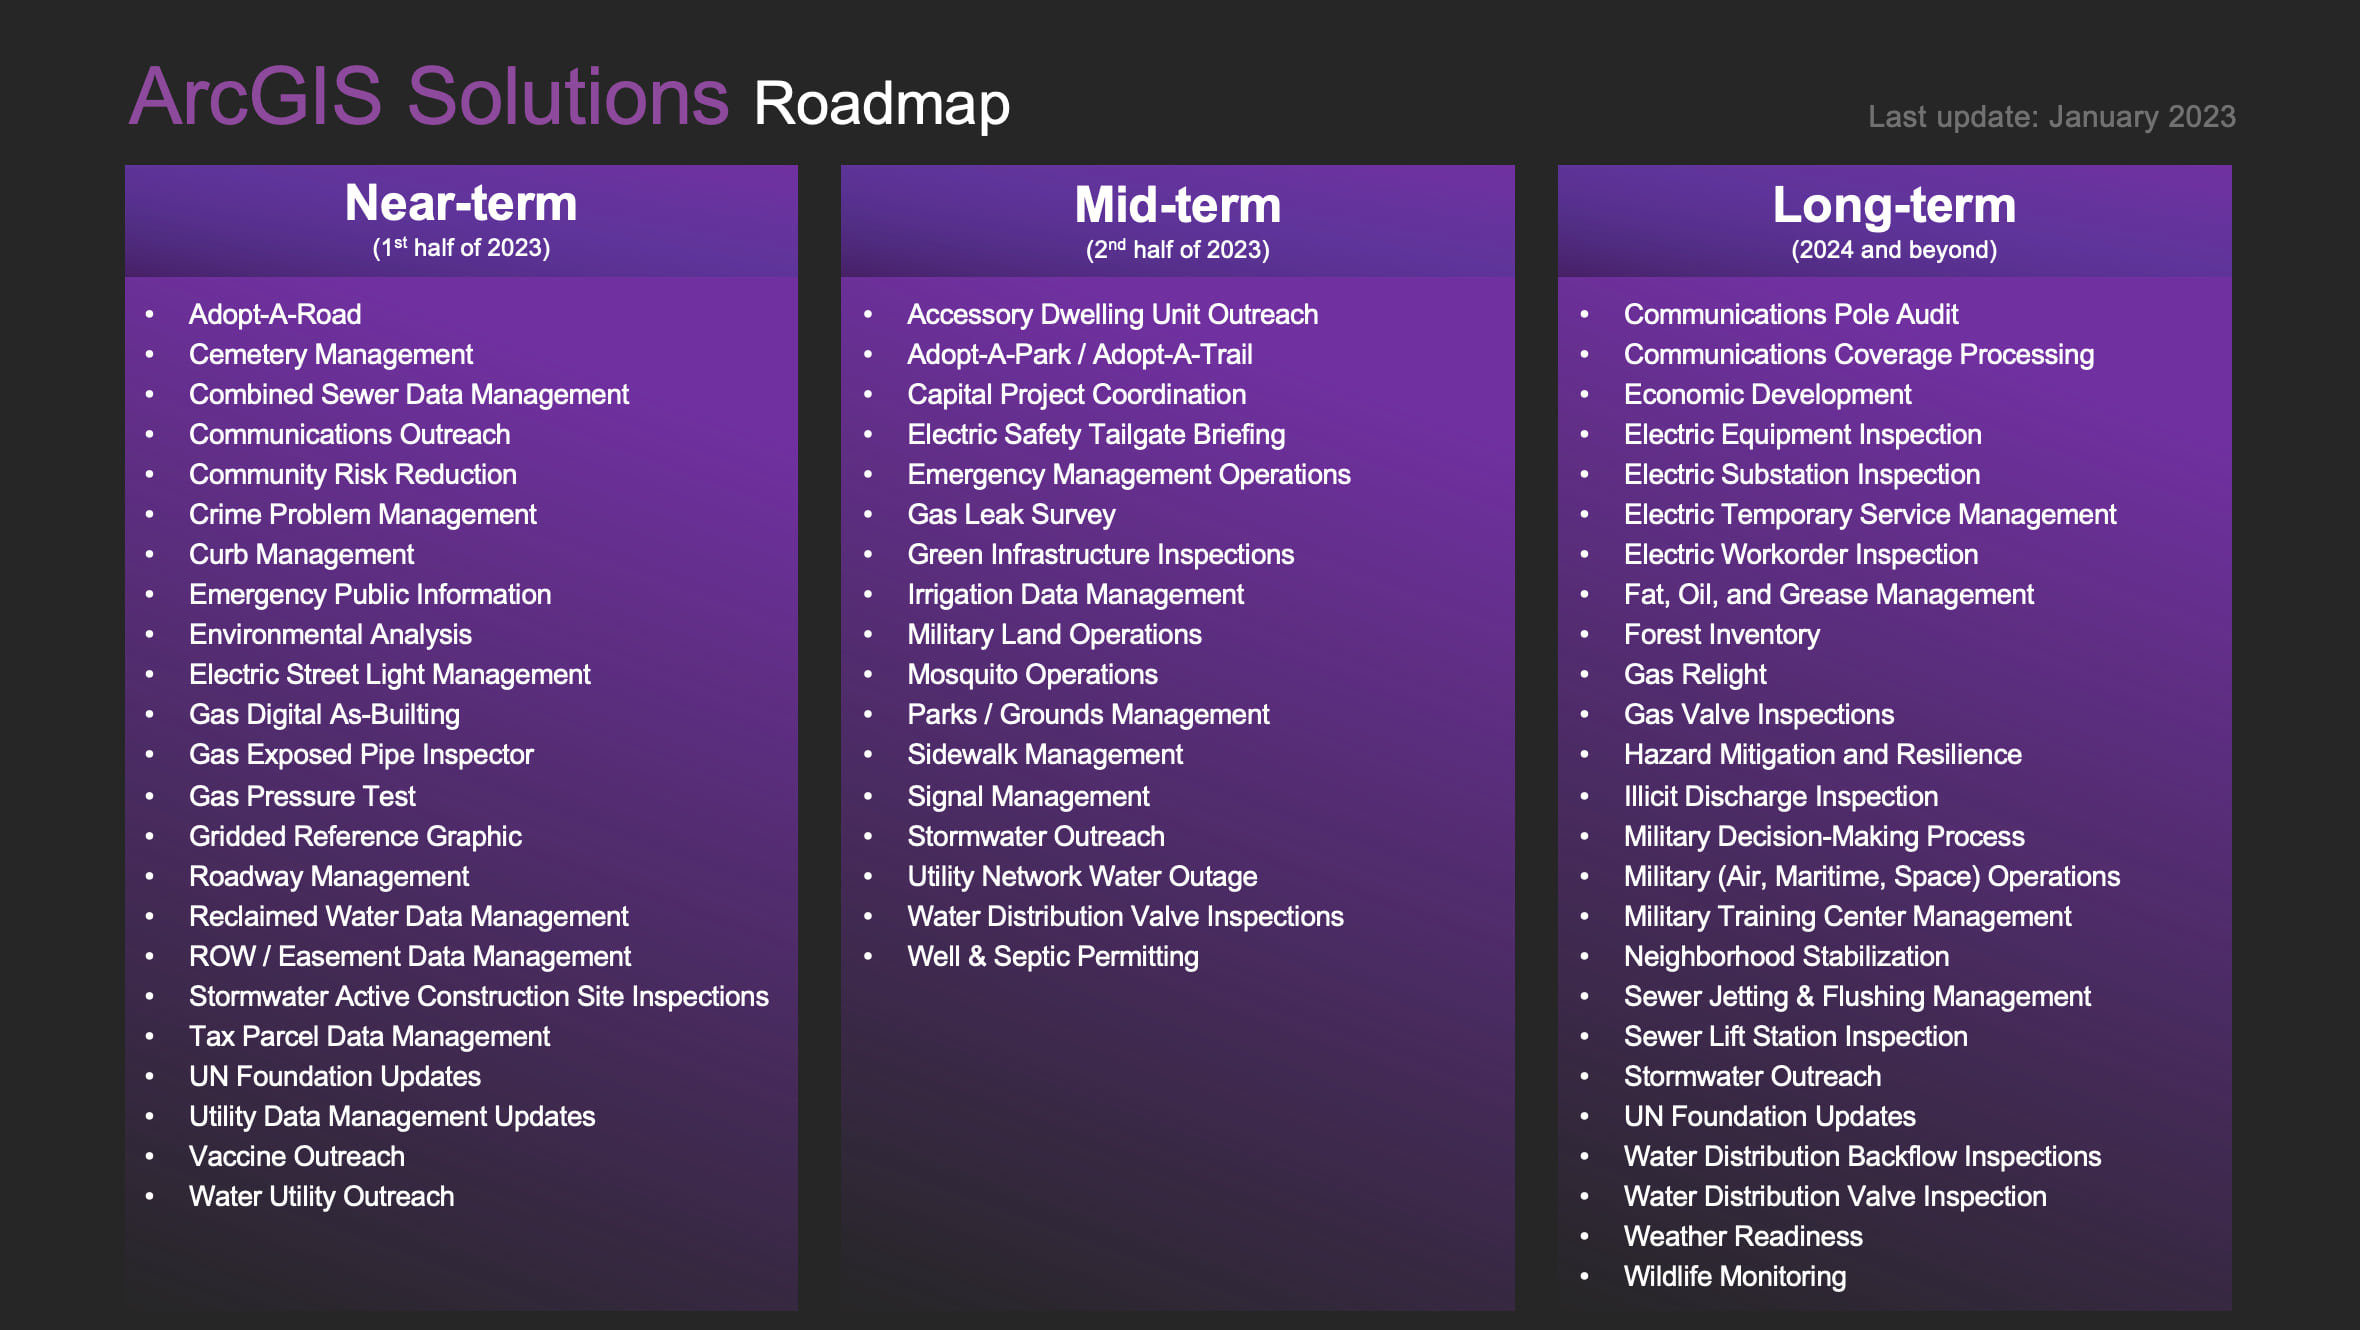 The January 2023 ArcGIS Solutions Roadmap with list of planned solutions.